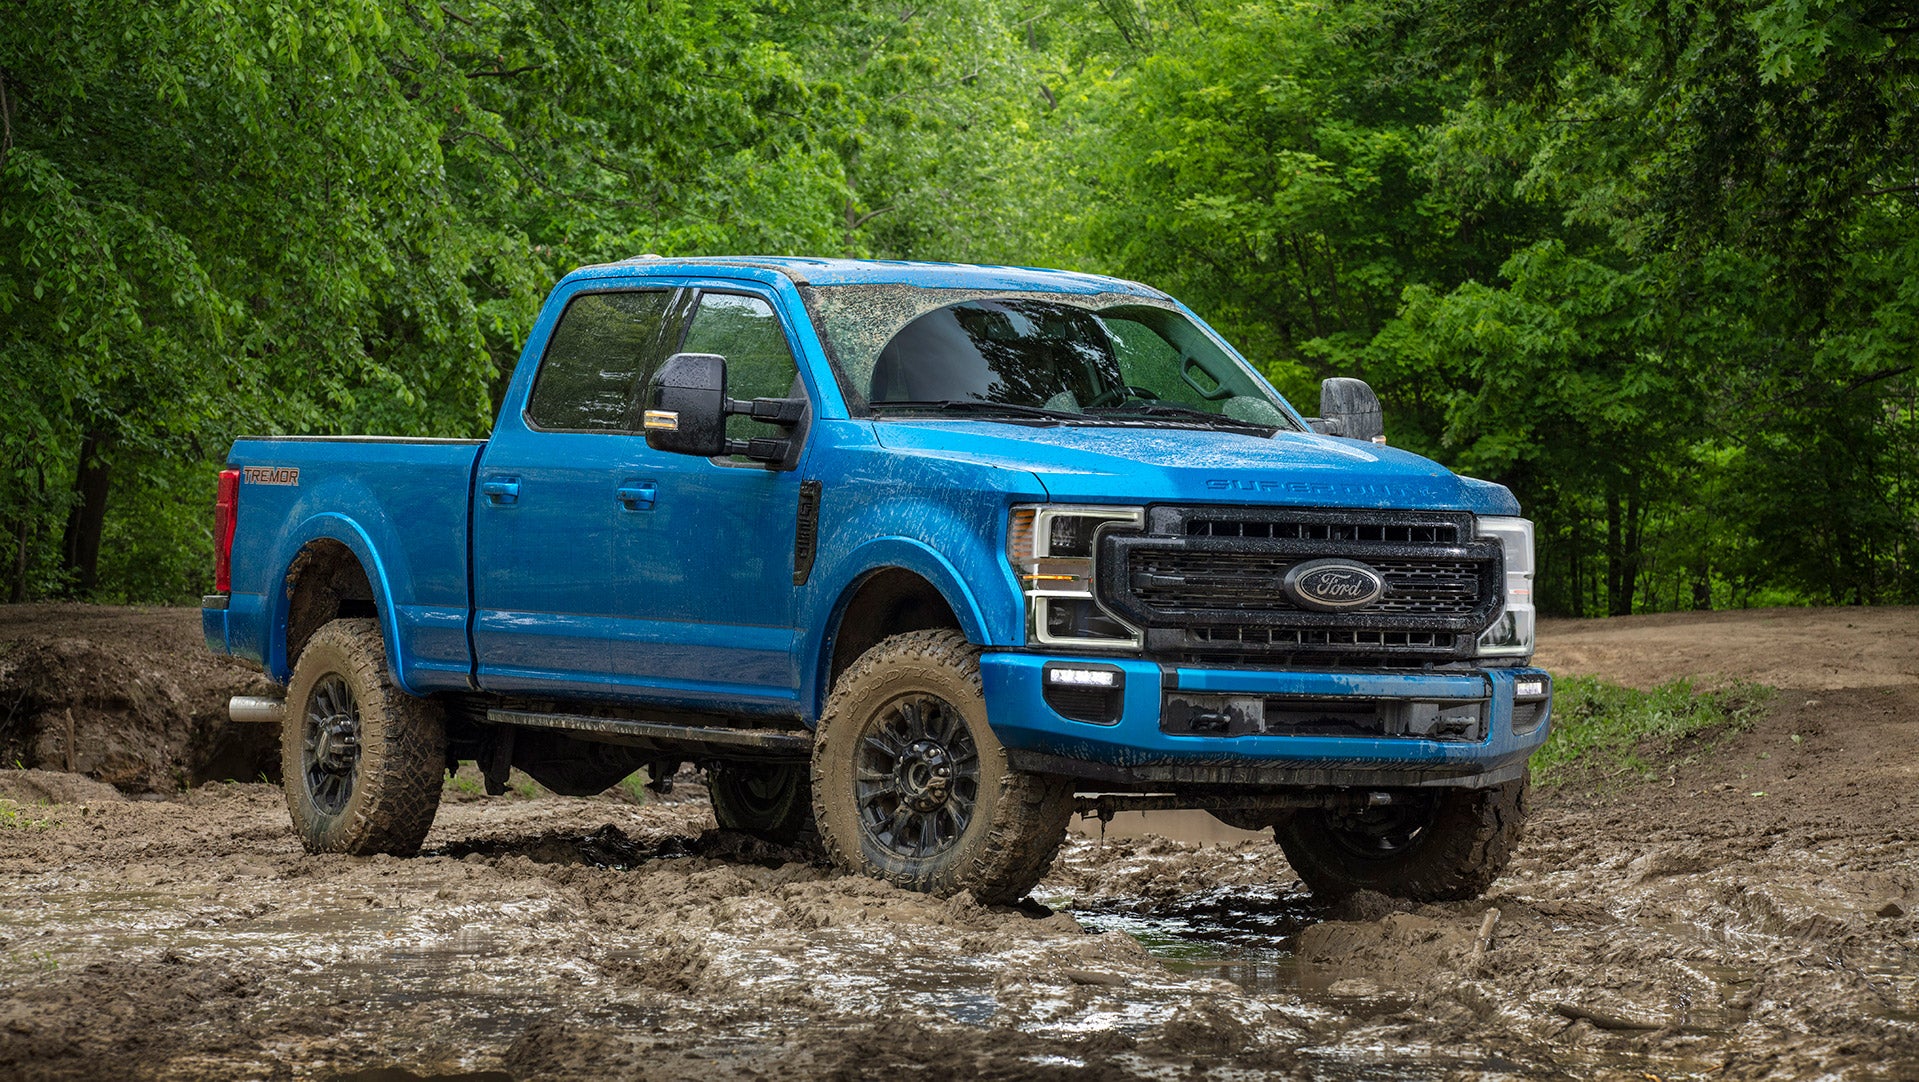 2020 Ford Super Duty Tremor Off-Road Package: Taking the Fight to Ram’s Power Wagon